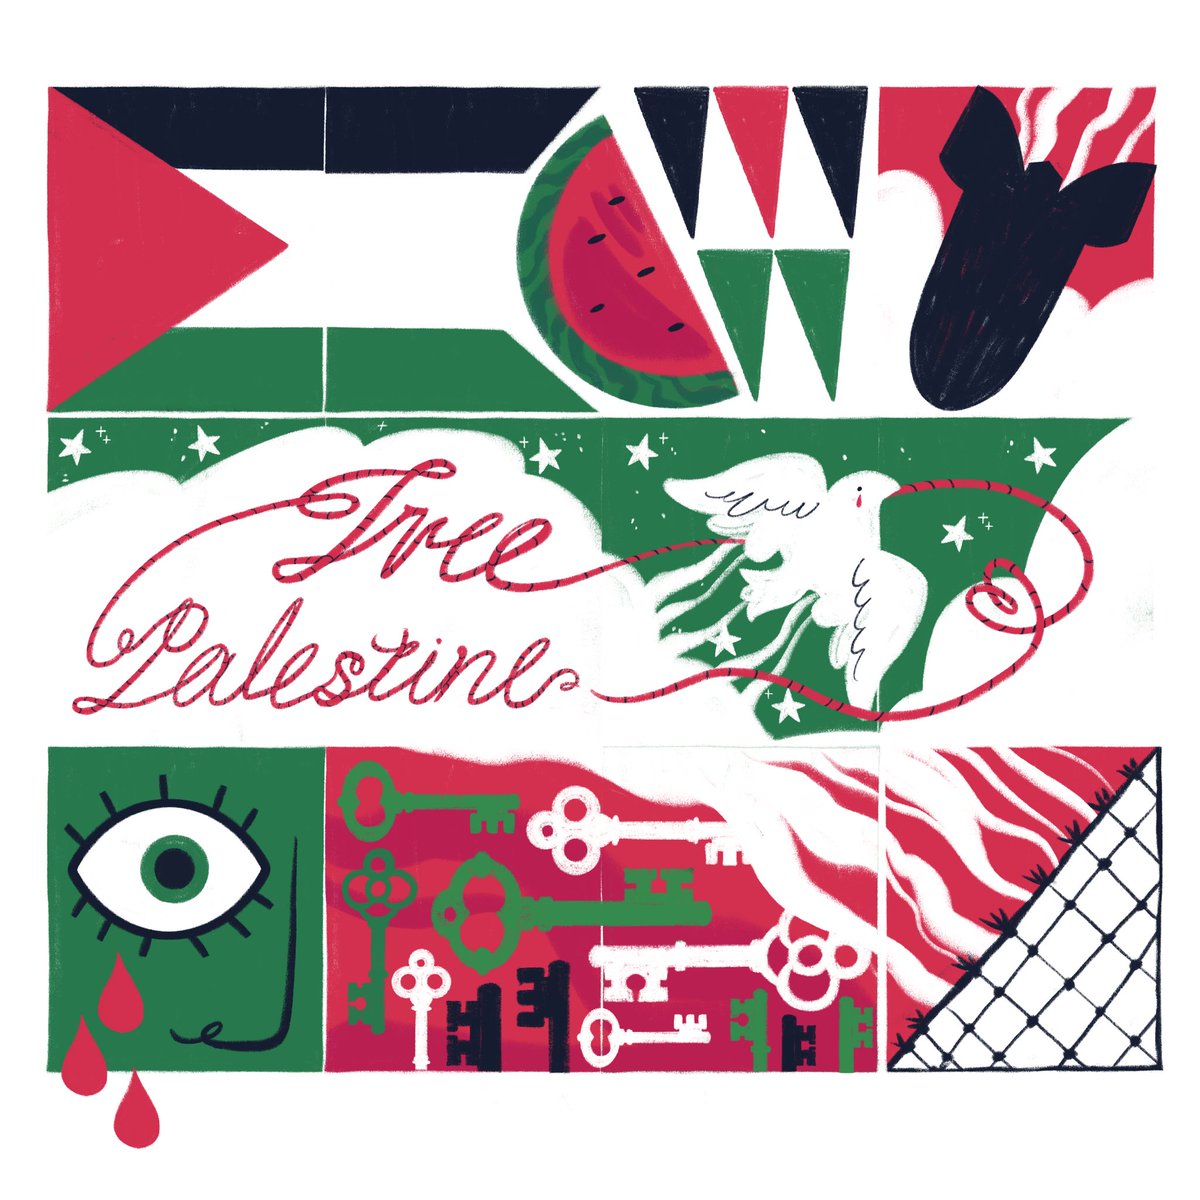 WE MUST KEEP FIGHTING FOR THE PEOPLE OF PALESTINE!!! WE MUST END THE OCCUPATION!!! WE MUST END THE GENOCIDE!!! WE MUST FREE PALESTINE!!!!!!!!!!!!! ❤️🇵🇸❤️🇵🇸❤️🇵🇸❤️